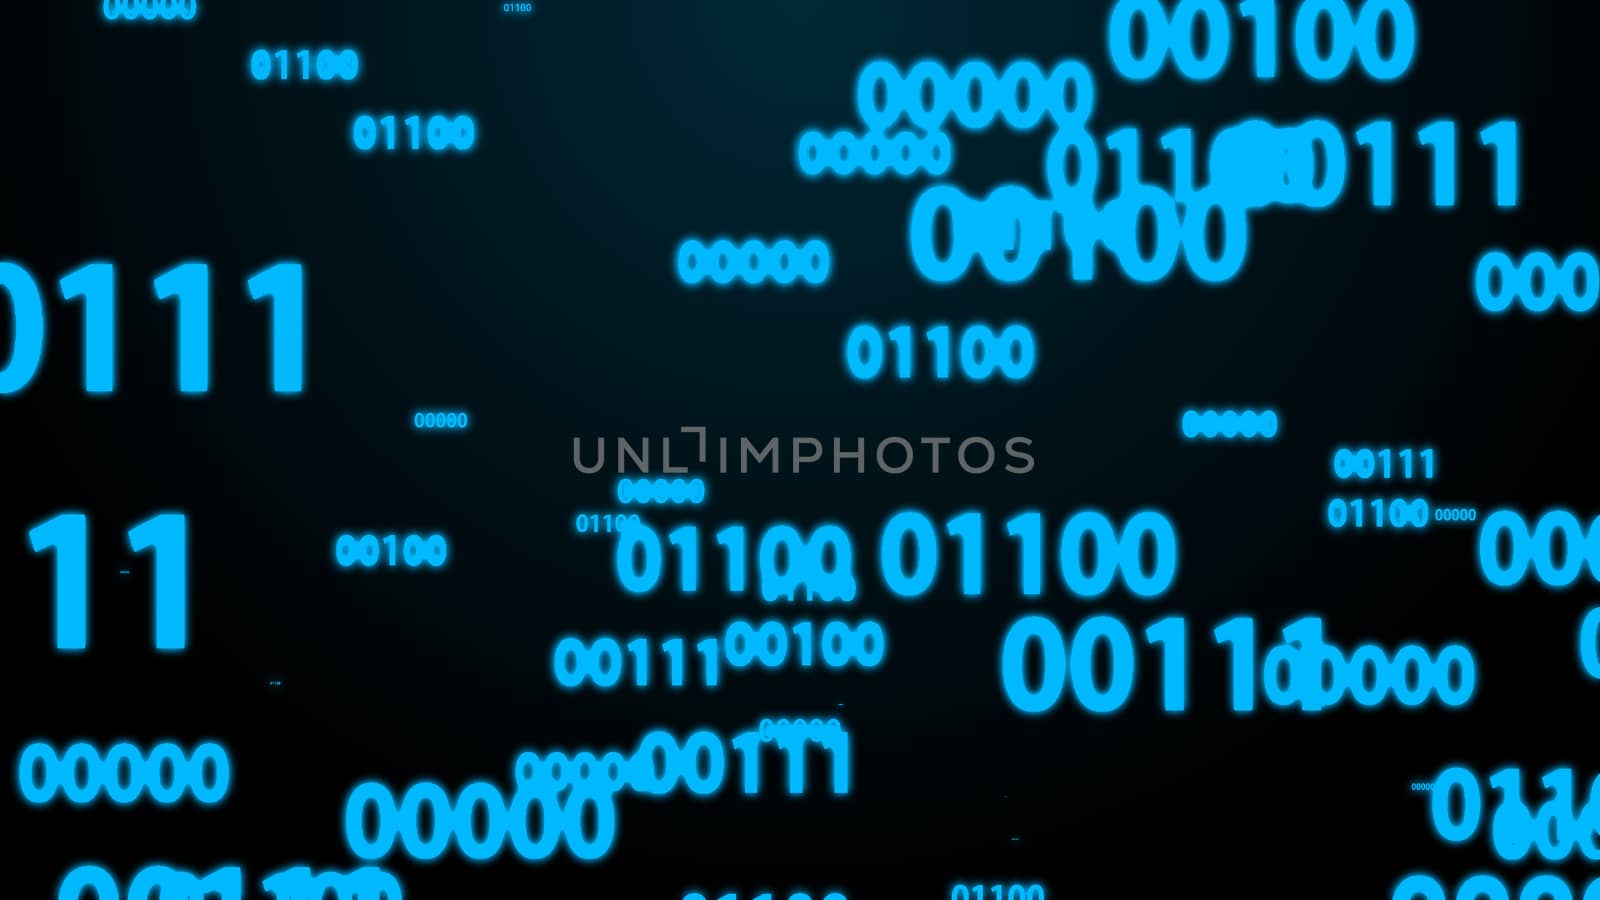 Random 5 Digit Binary Numbers Spreading All Over The Screen in Blue Color Theme Background by ariya23156